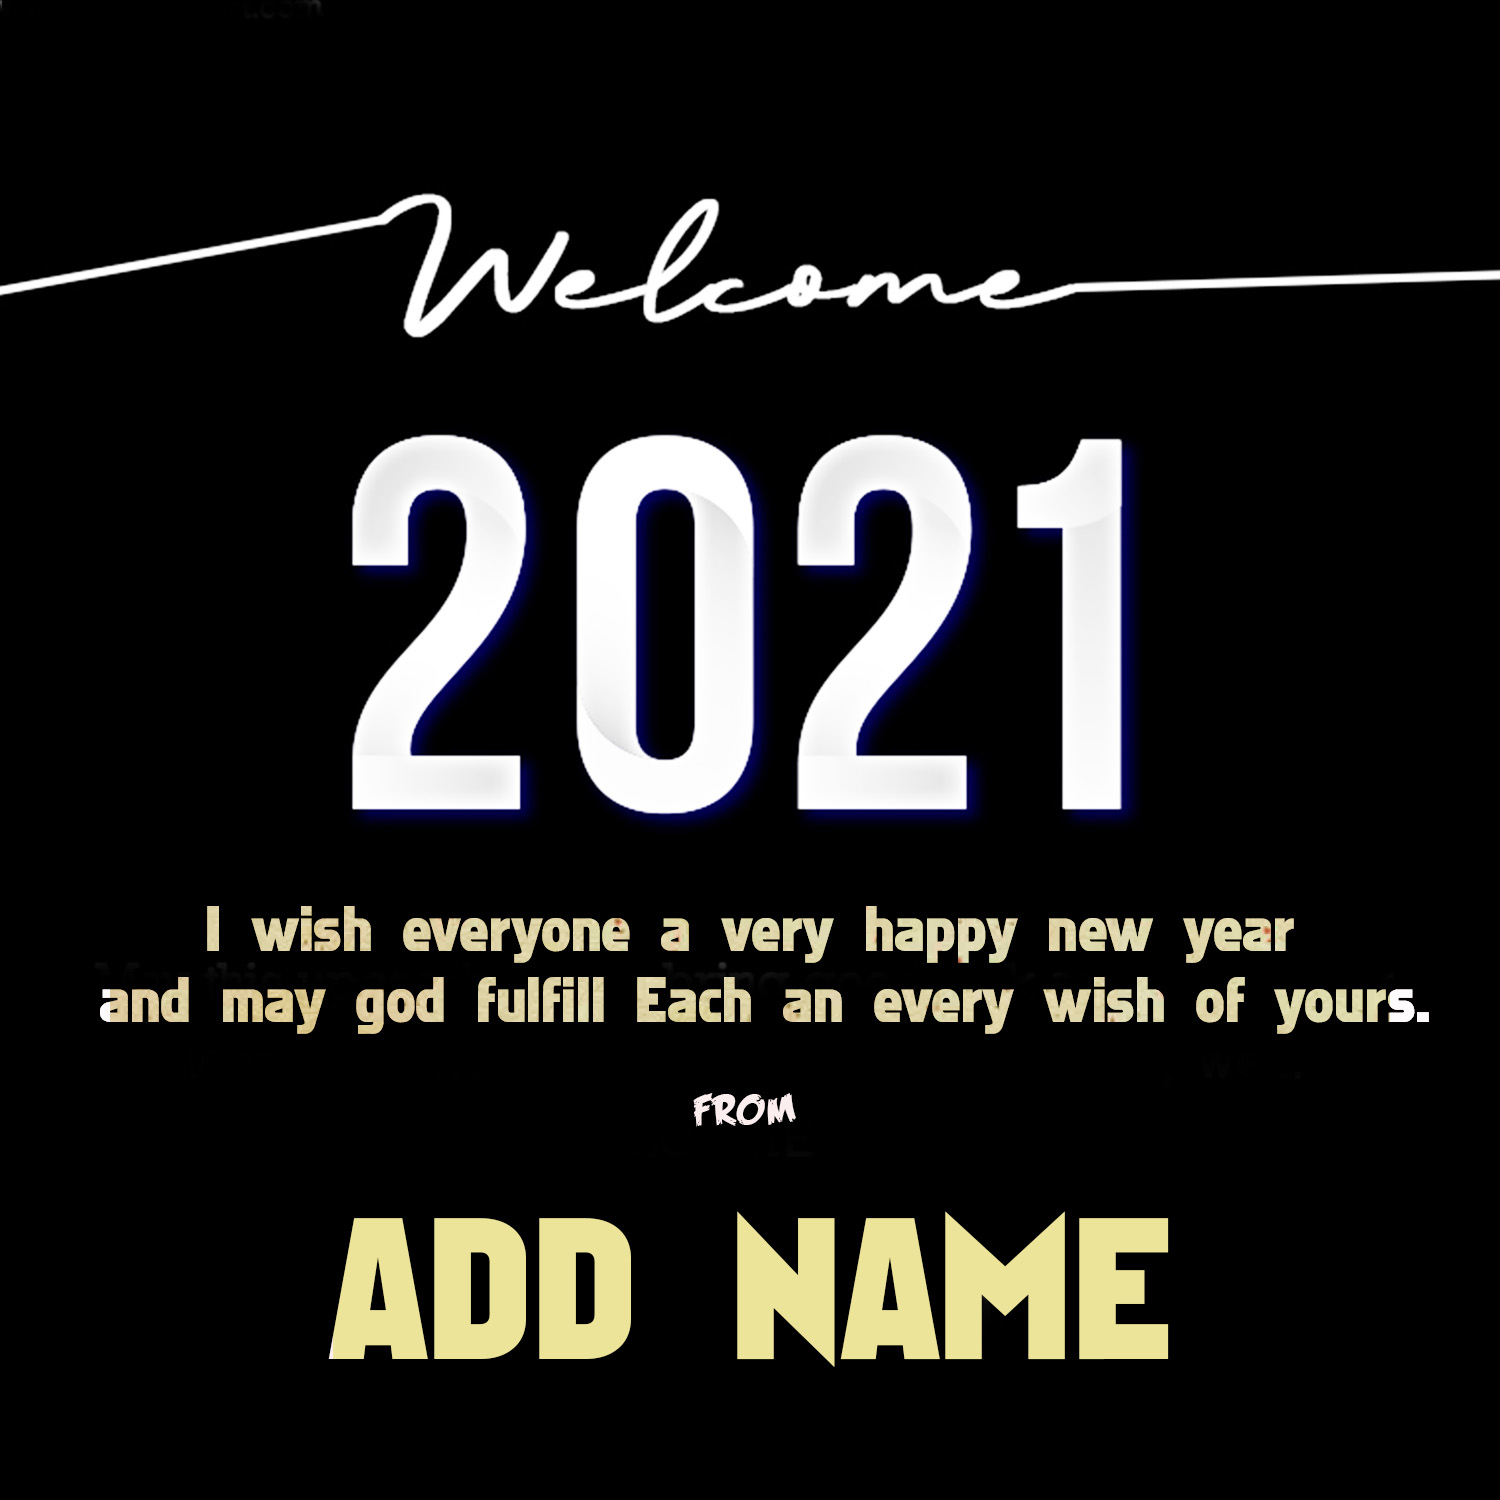 New Year Wishes Card